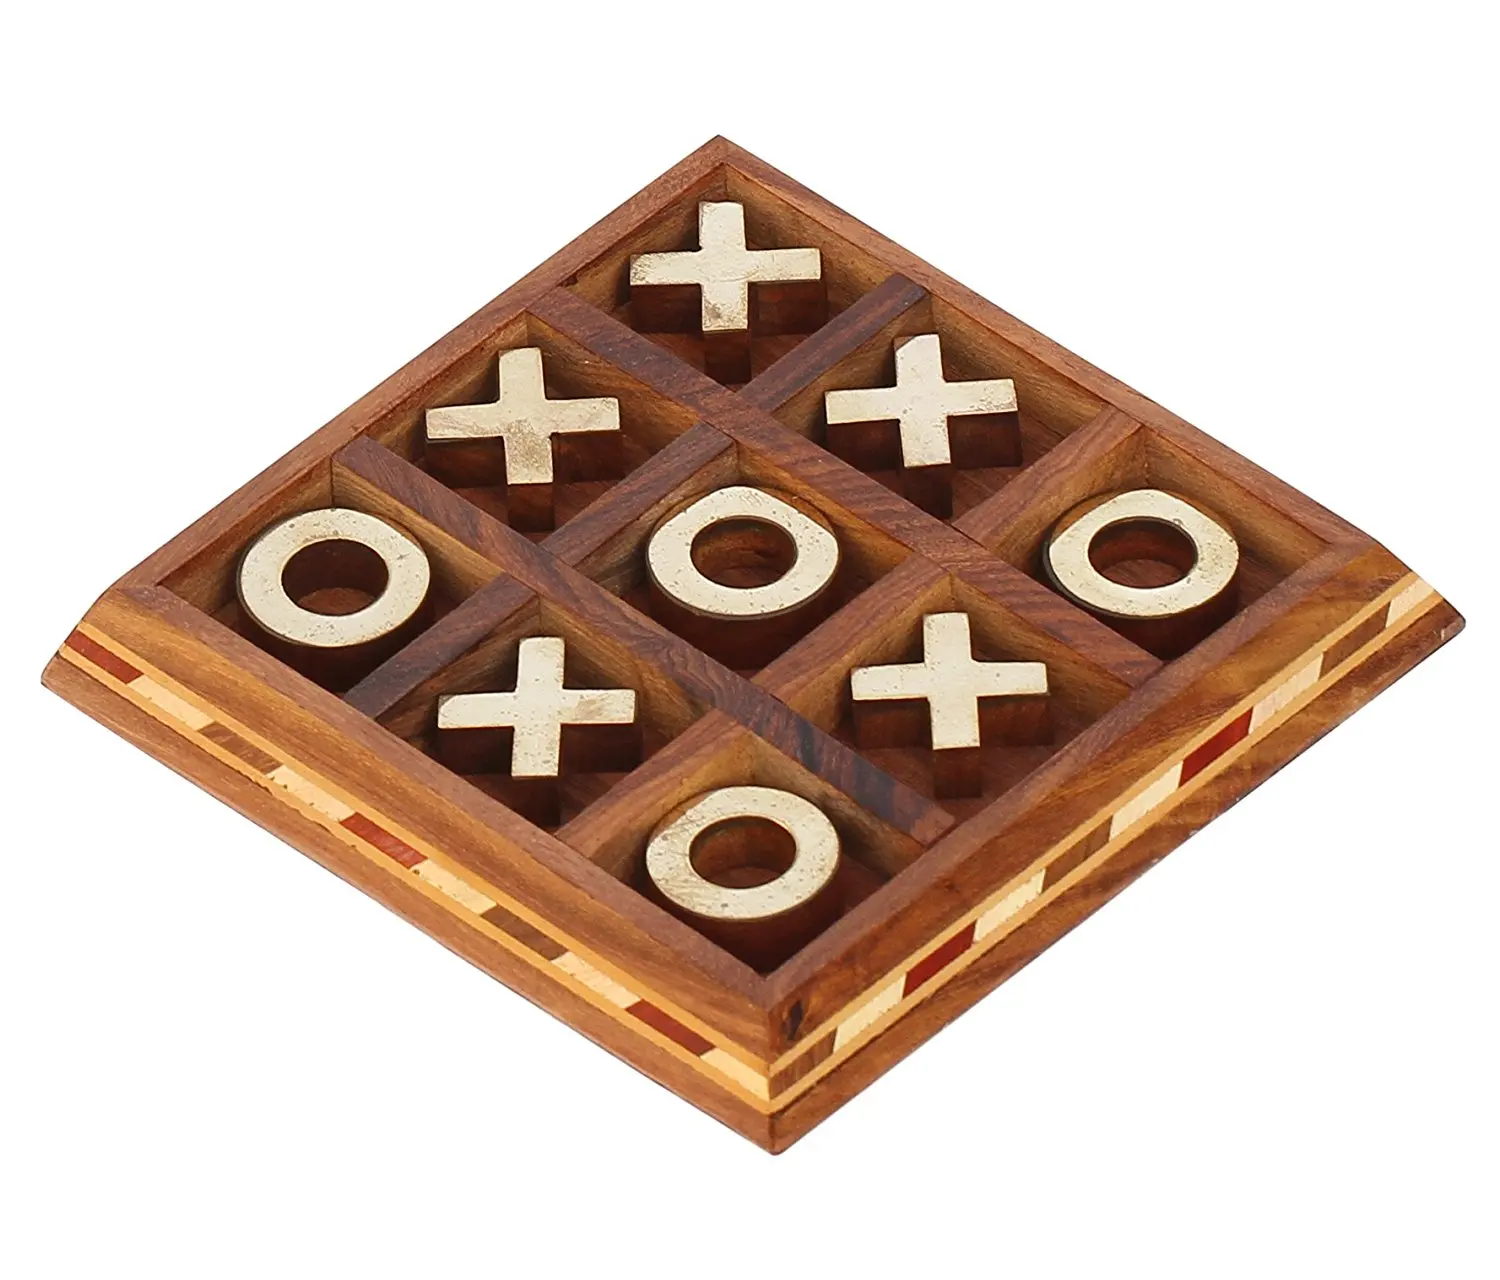 Buy Best Tic Tac Toe Souvnear Wood Board Game 5 5 Inch Tick Tack Toe Metal Noughts And Crosses Rosewood Handmade Wooden Centrepiece Game In Cheap Price On Alibaba Com